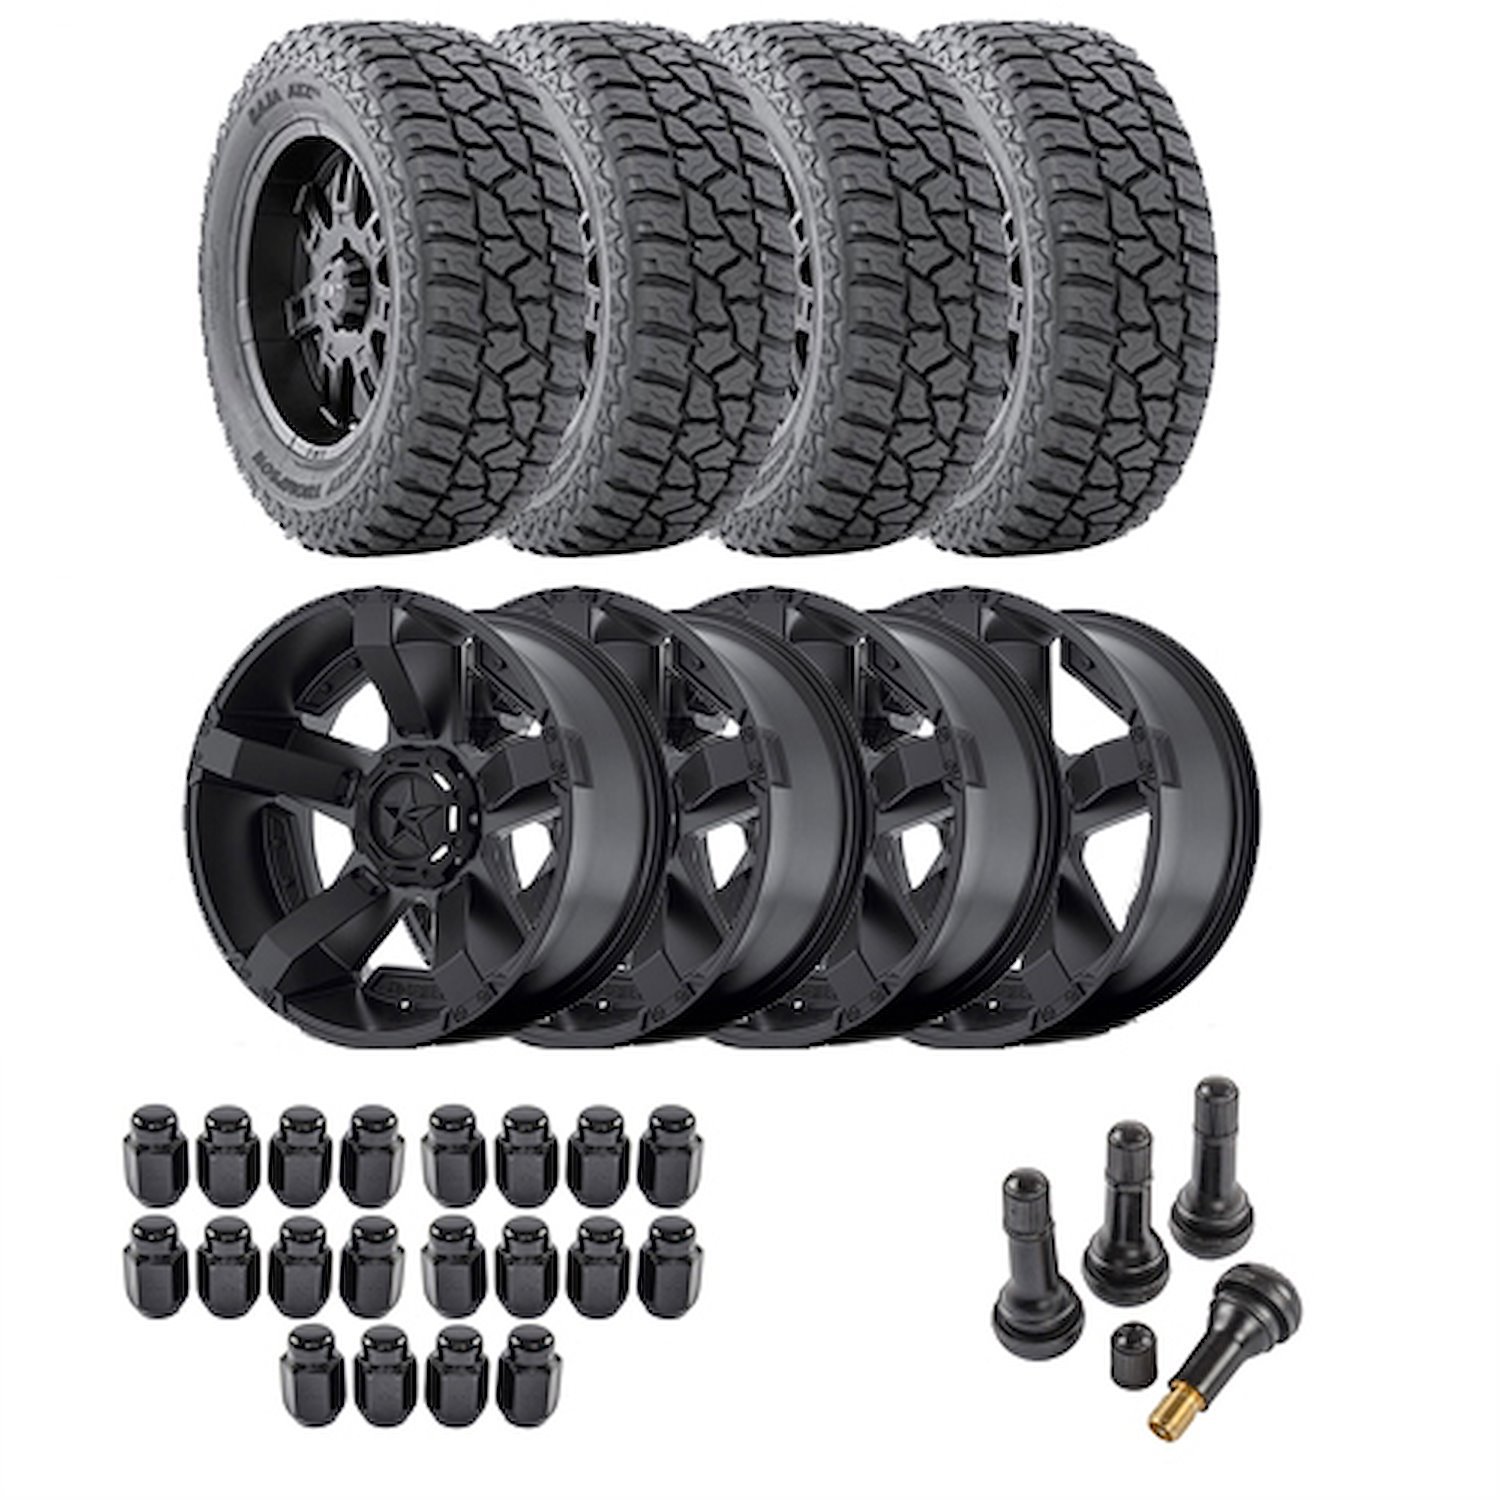 Wheel and Tire Kit for 1987-2006 Jeep Wrangler/1984-2001 Jeep Cherokee